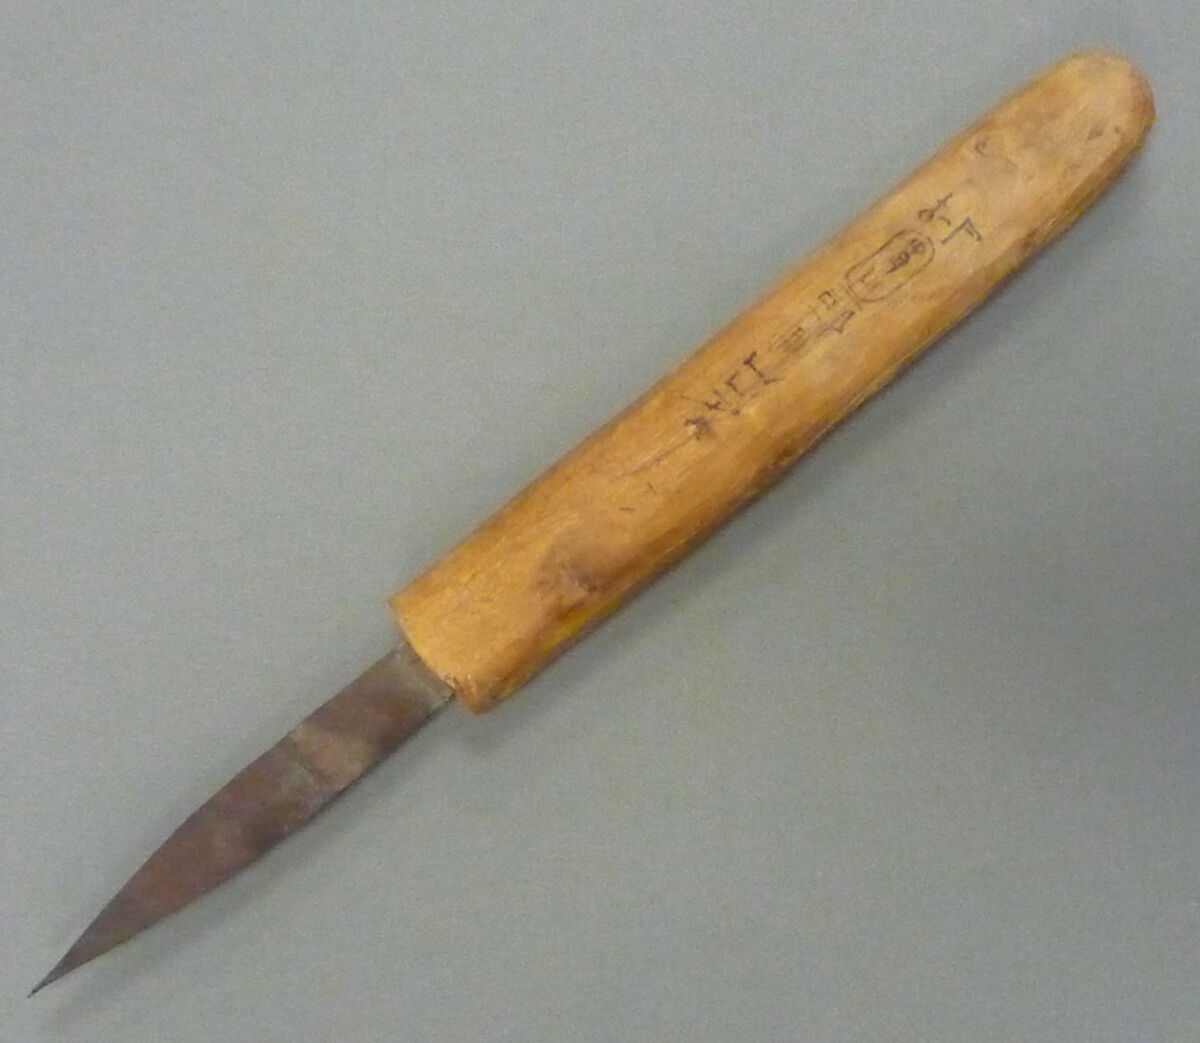 Carpenter's Chisel from a Foundation Deposit for Hatshepsut's Temple, Wood, bronze or copper alloy 